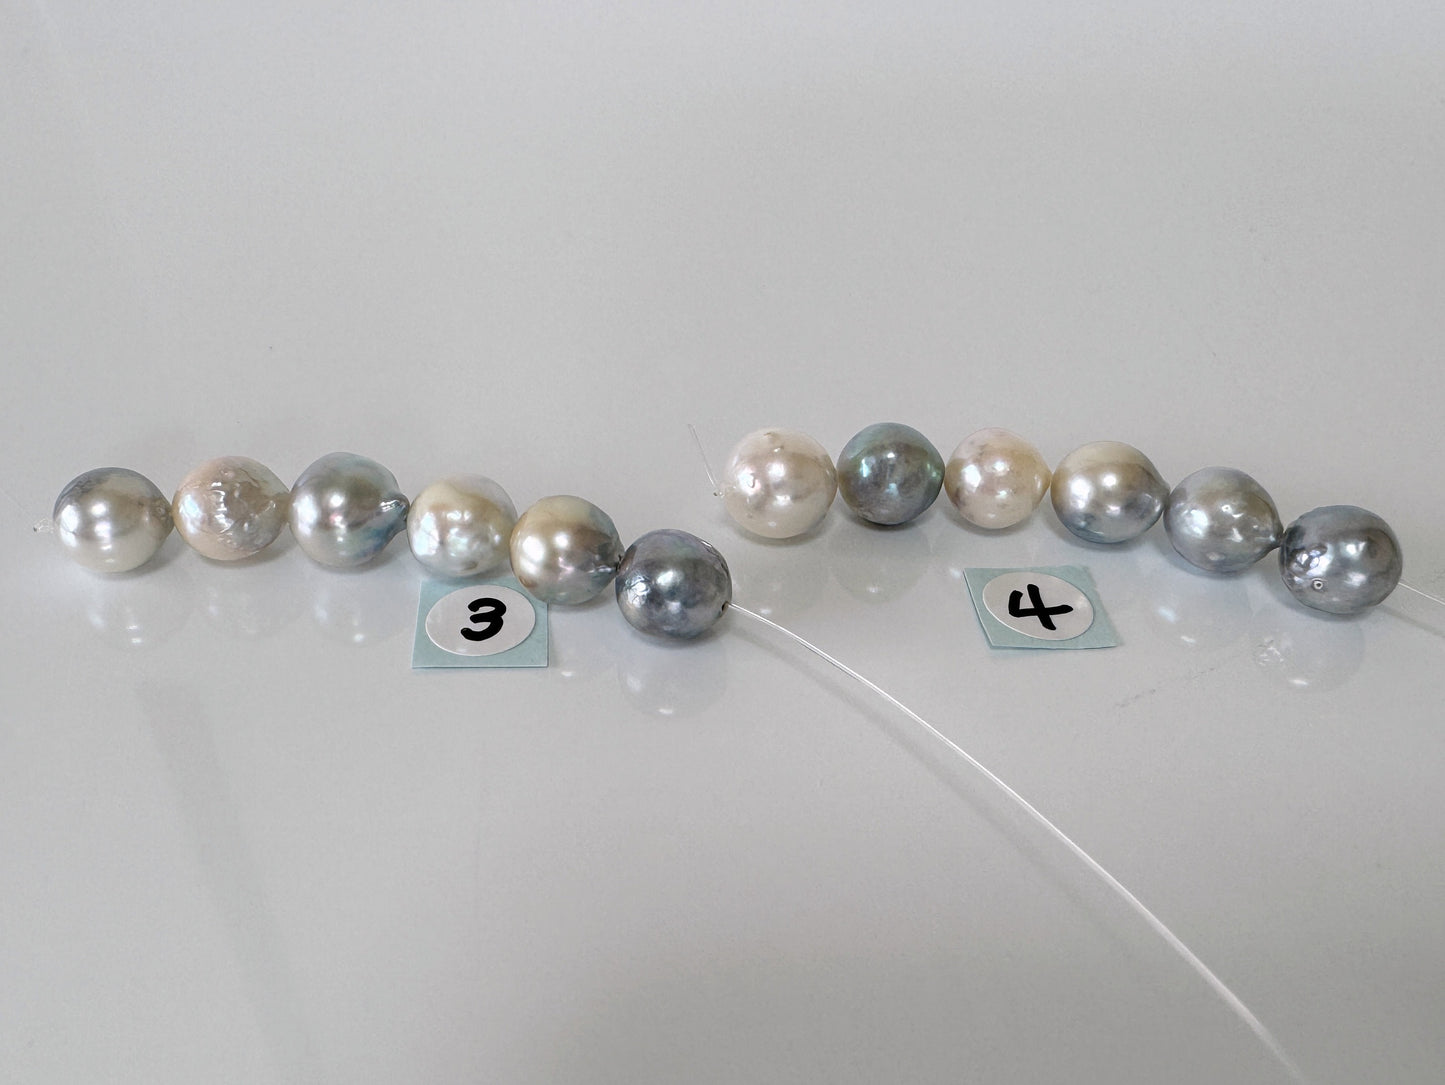 Japanese Natural blue/silver color Akoya Pearl Beads, 8-8.5mm, Mini Strand, Short Strand of 6 Pieces, Cultured in Sea Water